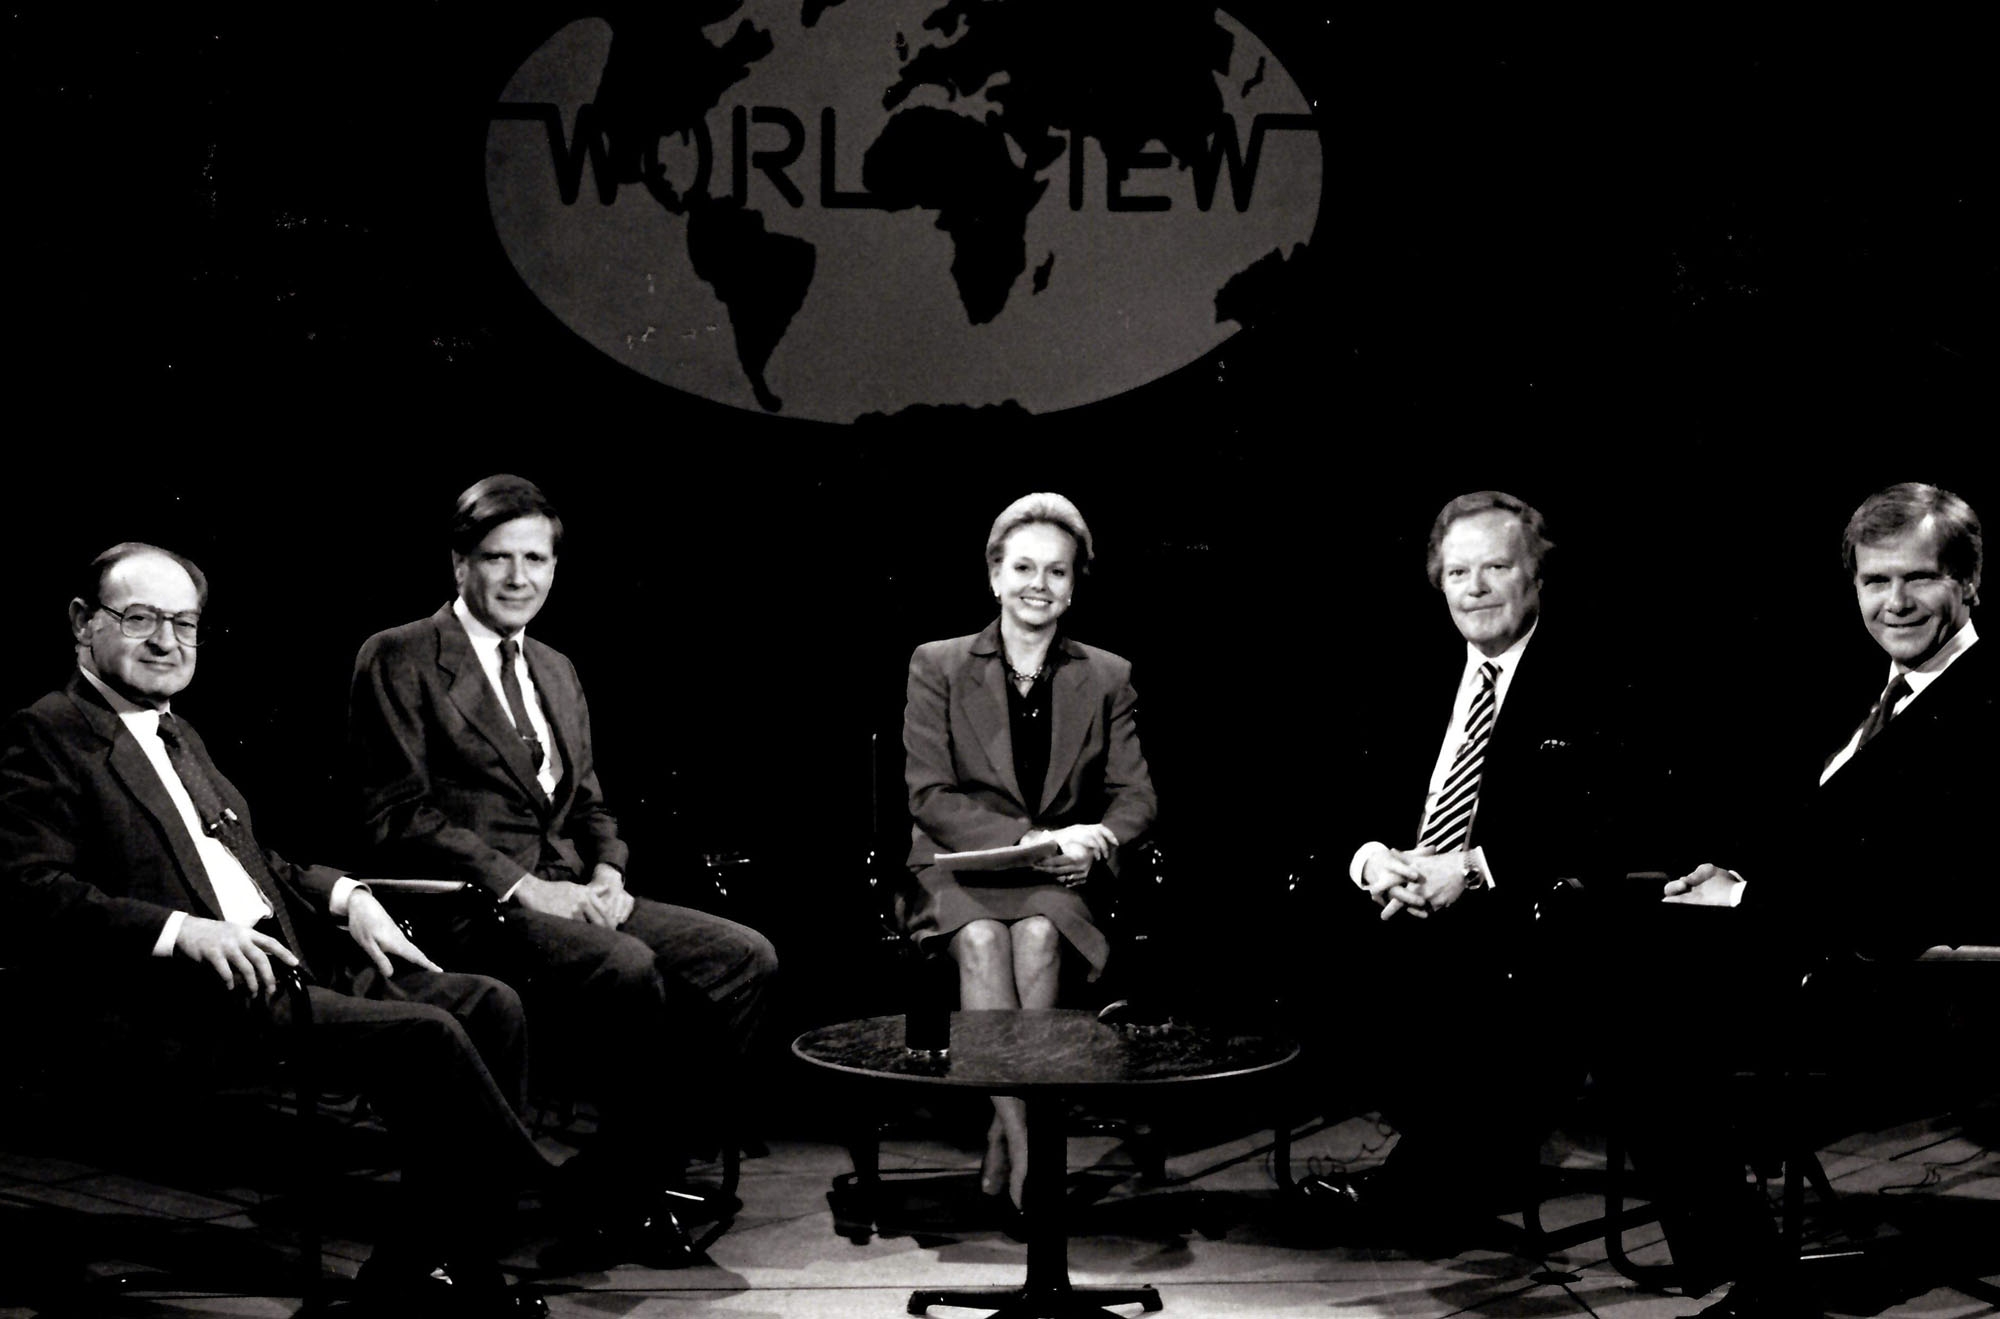 CFR coproduces <span class='italics'>Worldview</span> series with CUNY Television, which runs until 1990